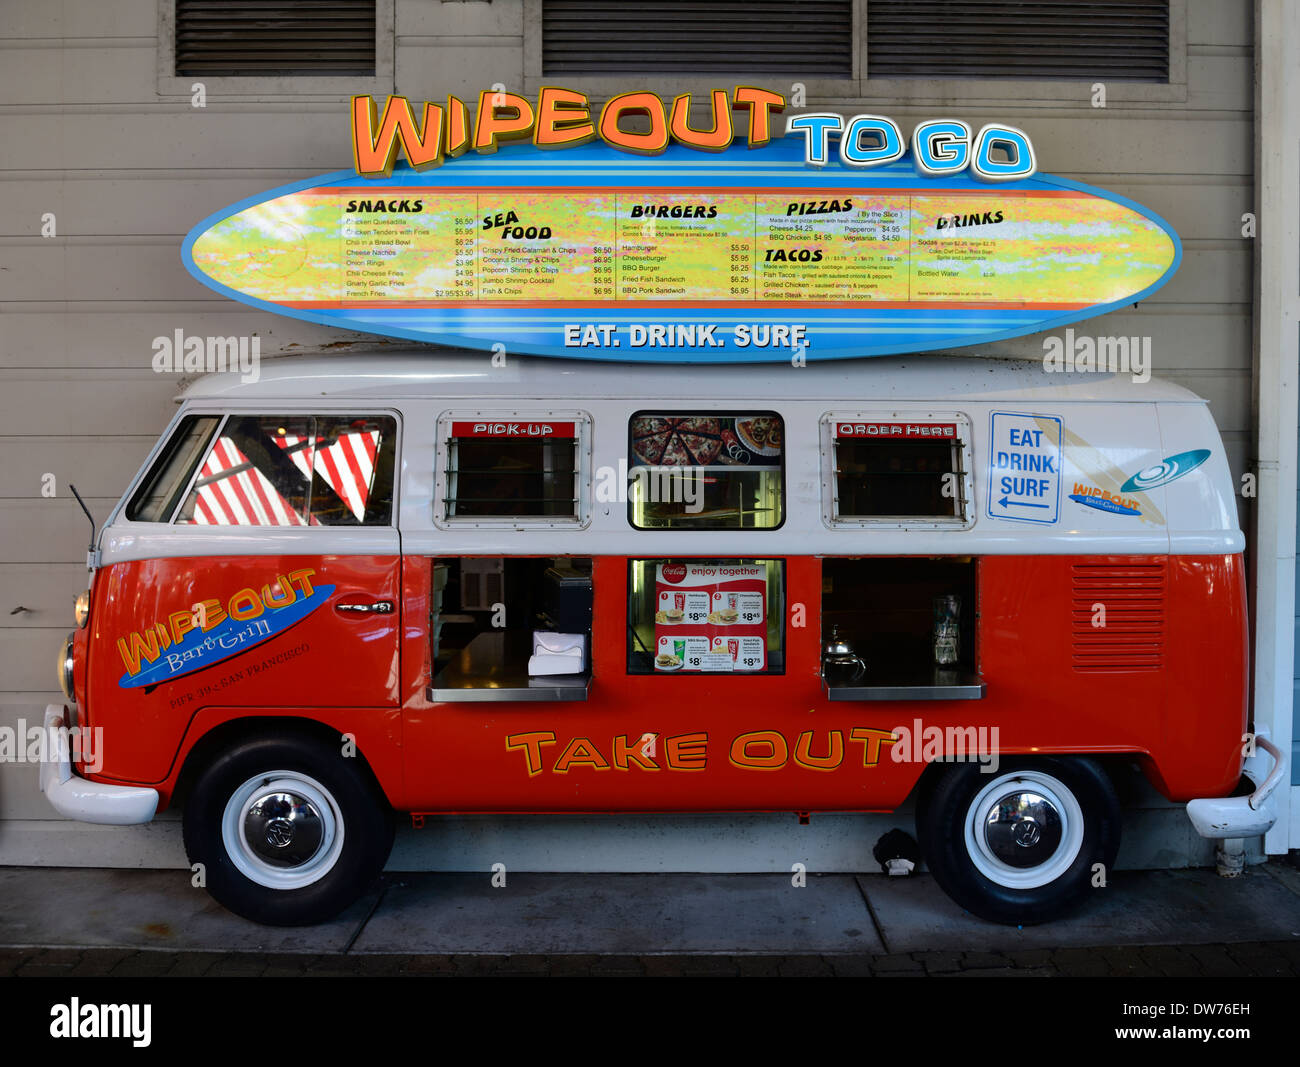 wipeout 100 burger bar takeout takeaway stall stand food Volkswagen beetle van fake shop front surf surfing culture Pier 39 Stock Photo